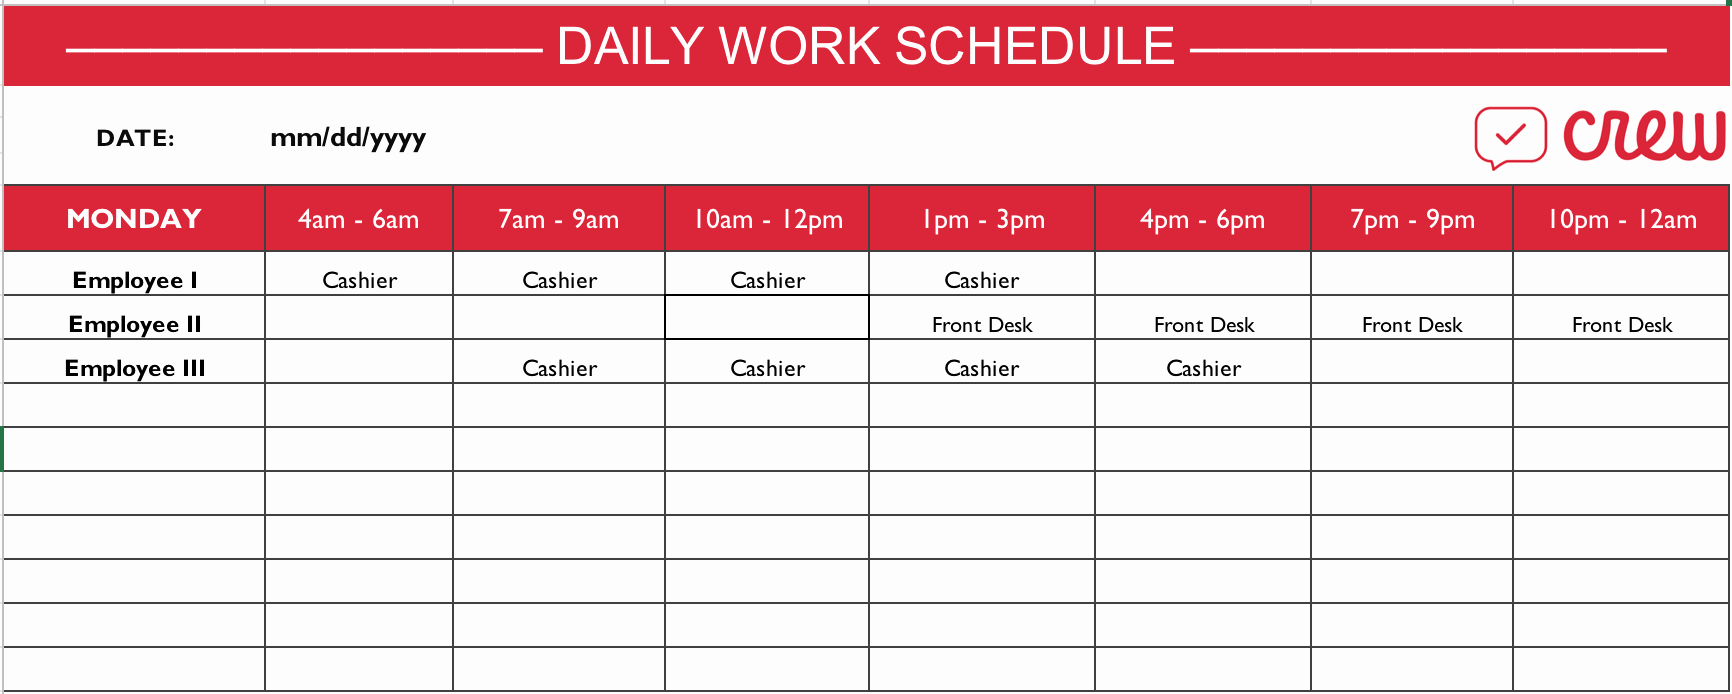 Weekly Work Schedule Template Free New Free Daily Work Schedule Template Crew